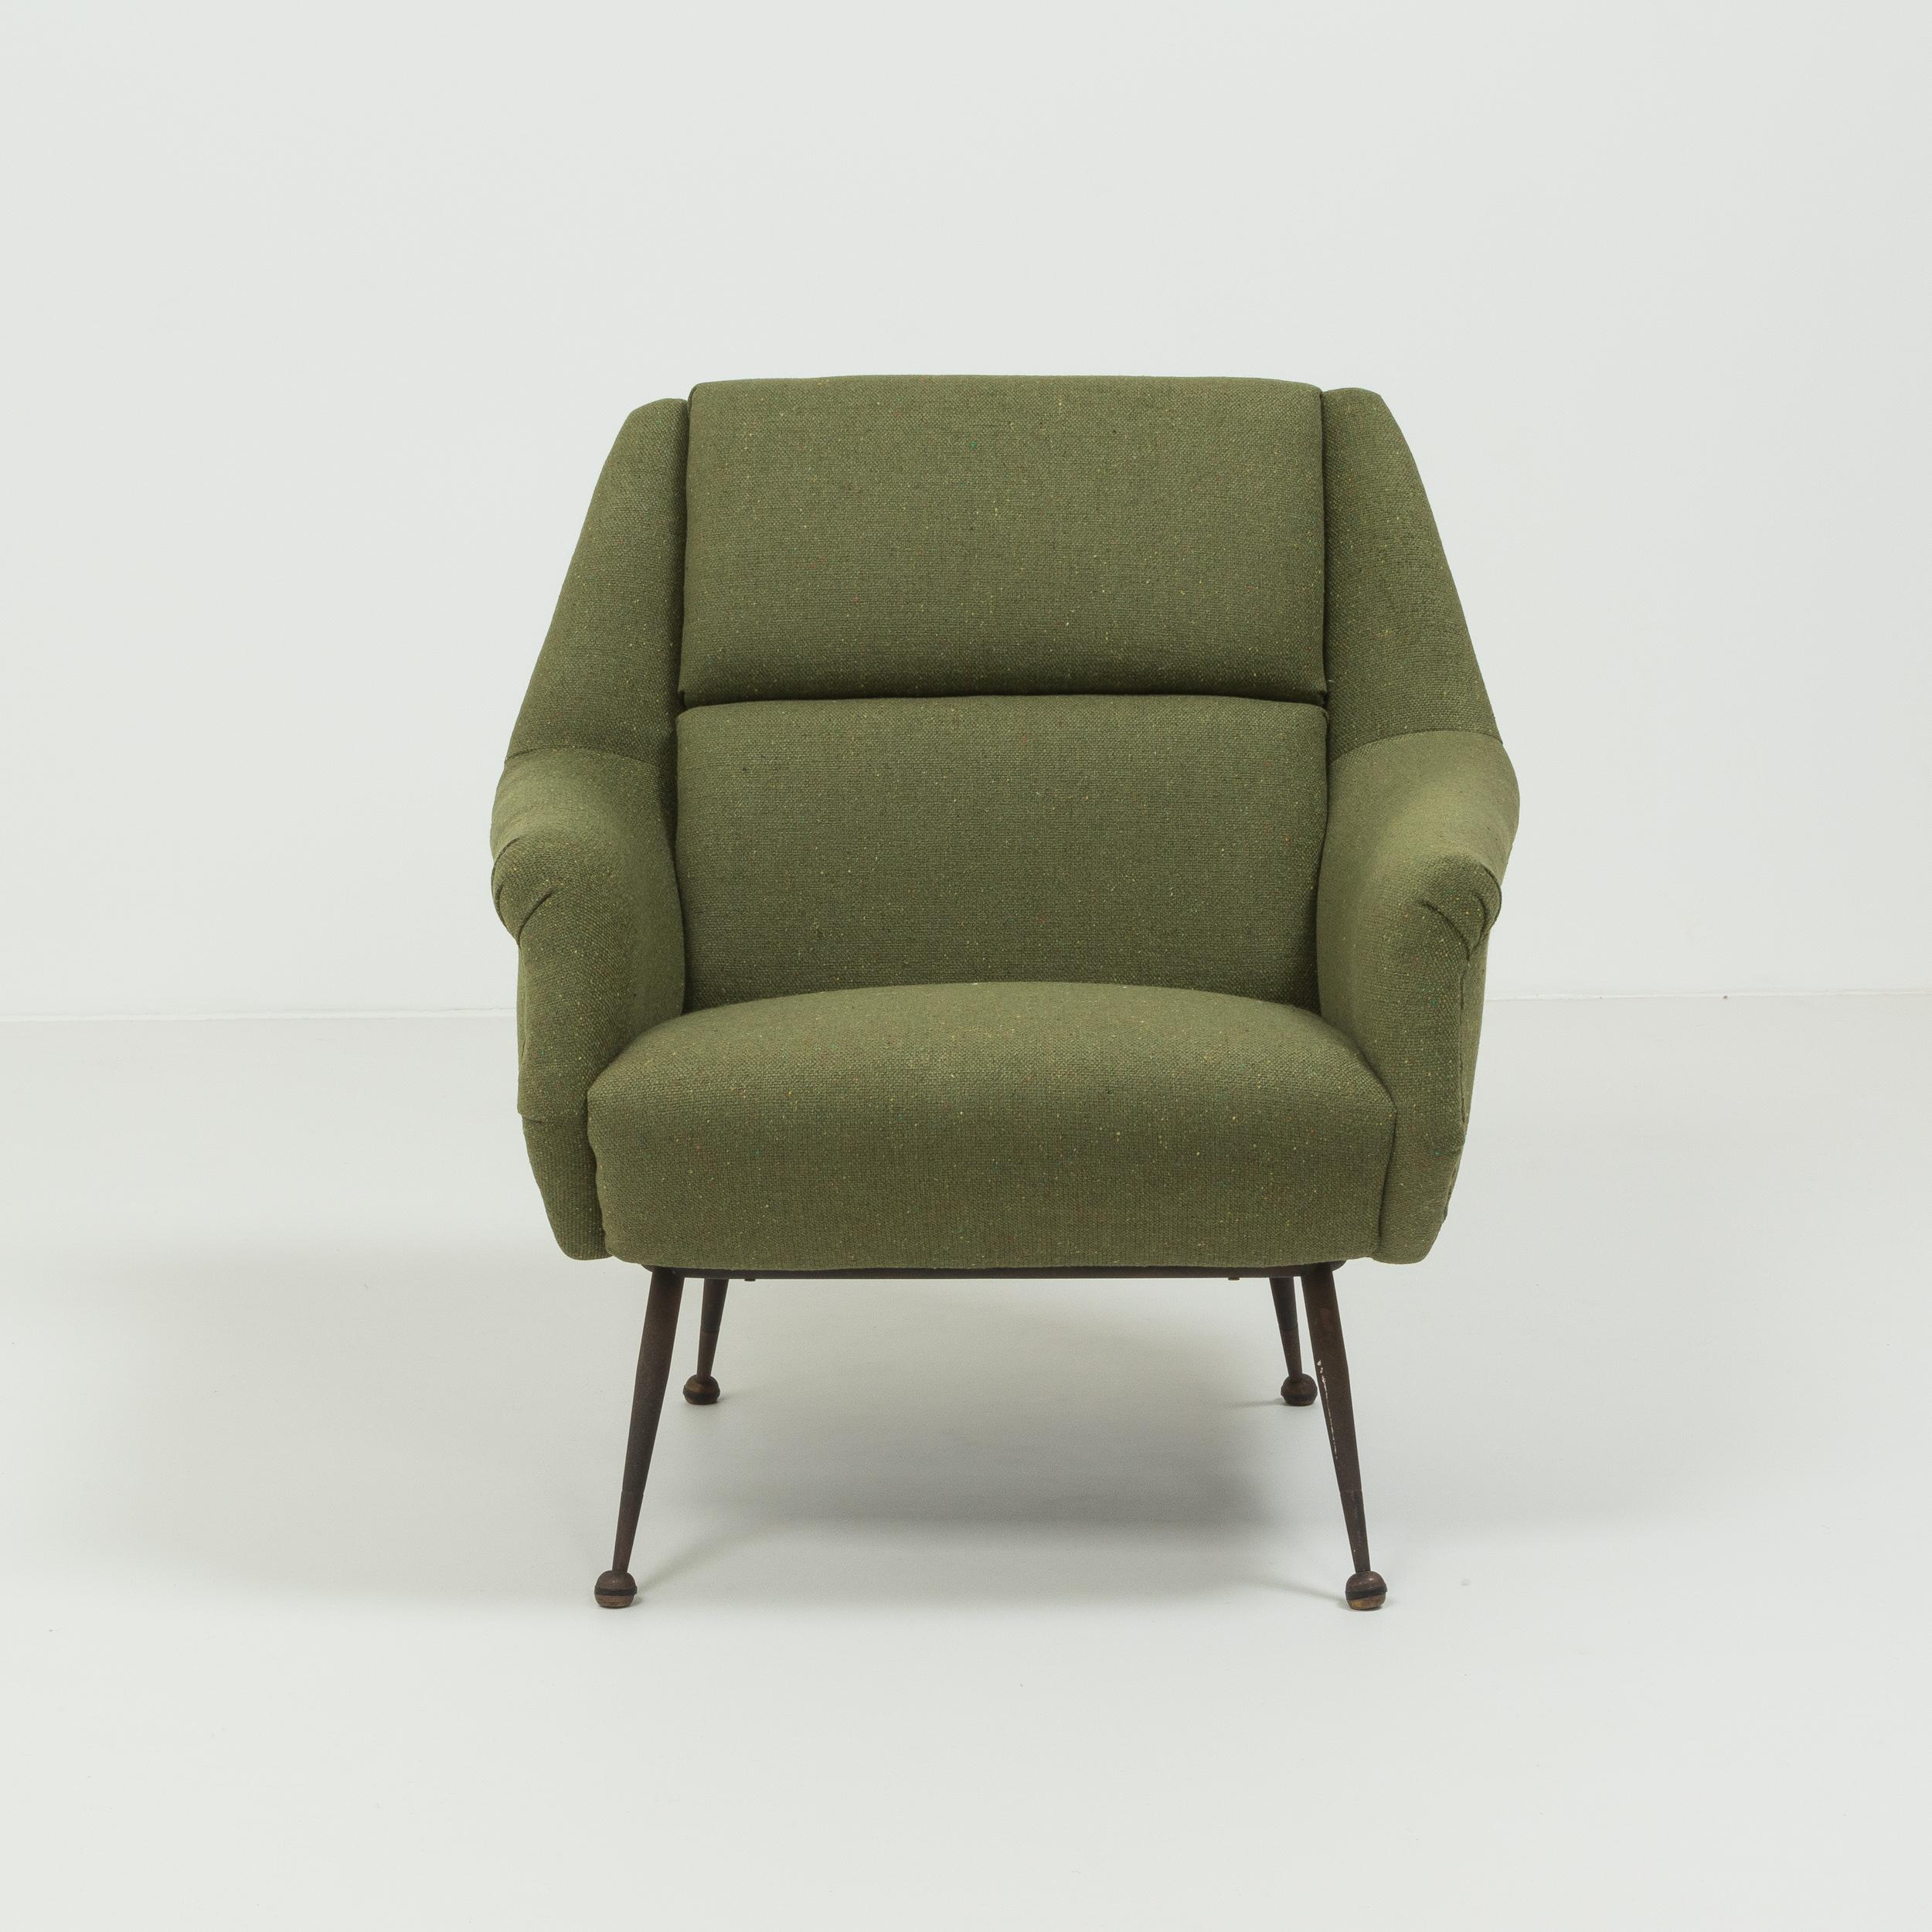 Designed by Gio Ponti for Minotti, this Classic lounge chair is a fantastic example of Mid-Century Modern design.

The chair has been newly and completely reupholstered in olive green tweed wool with multicolored flecks.

Featuring metal stiletto